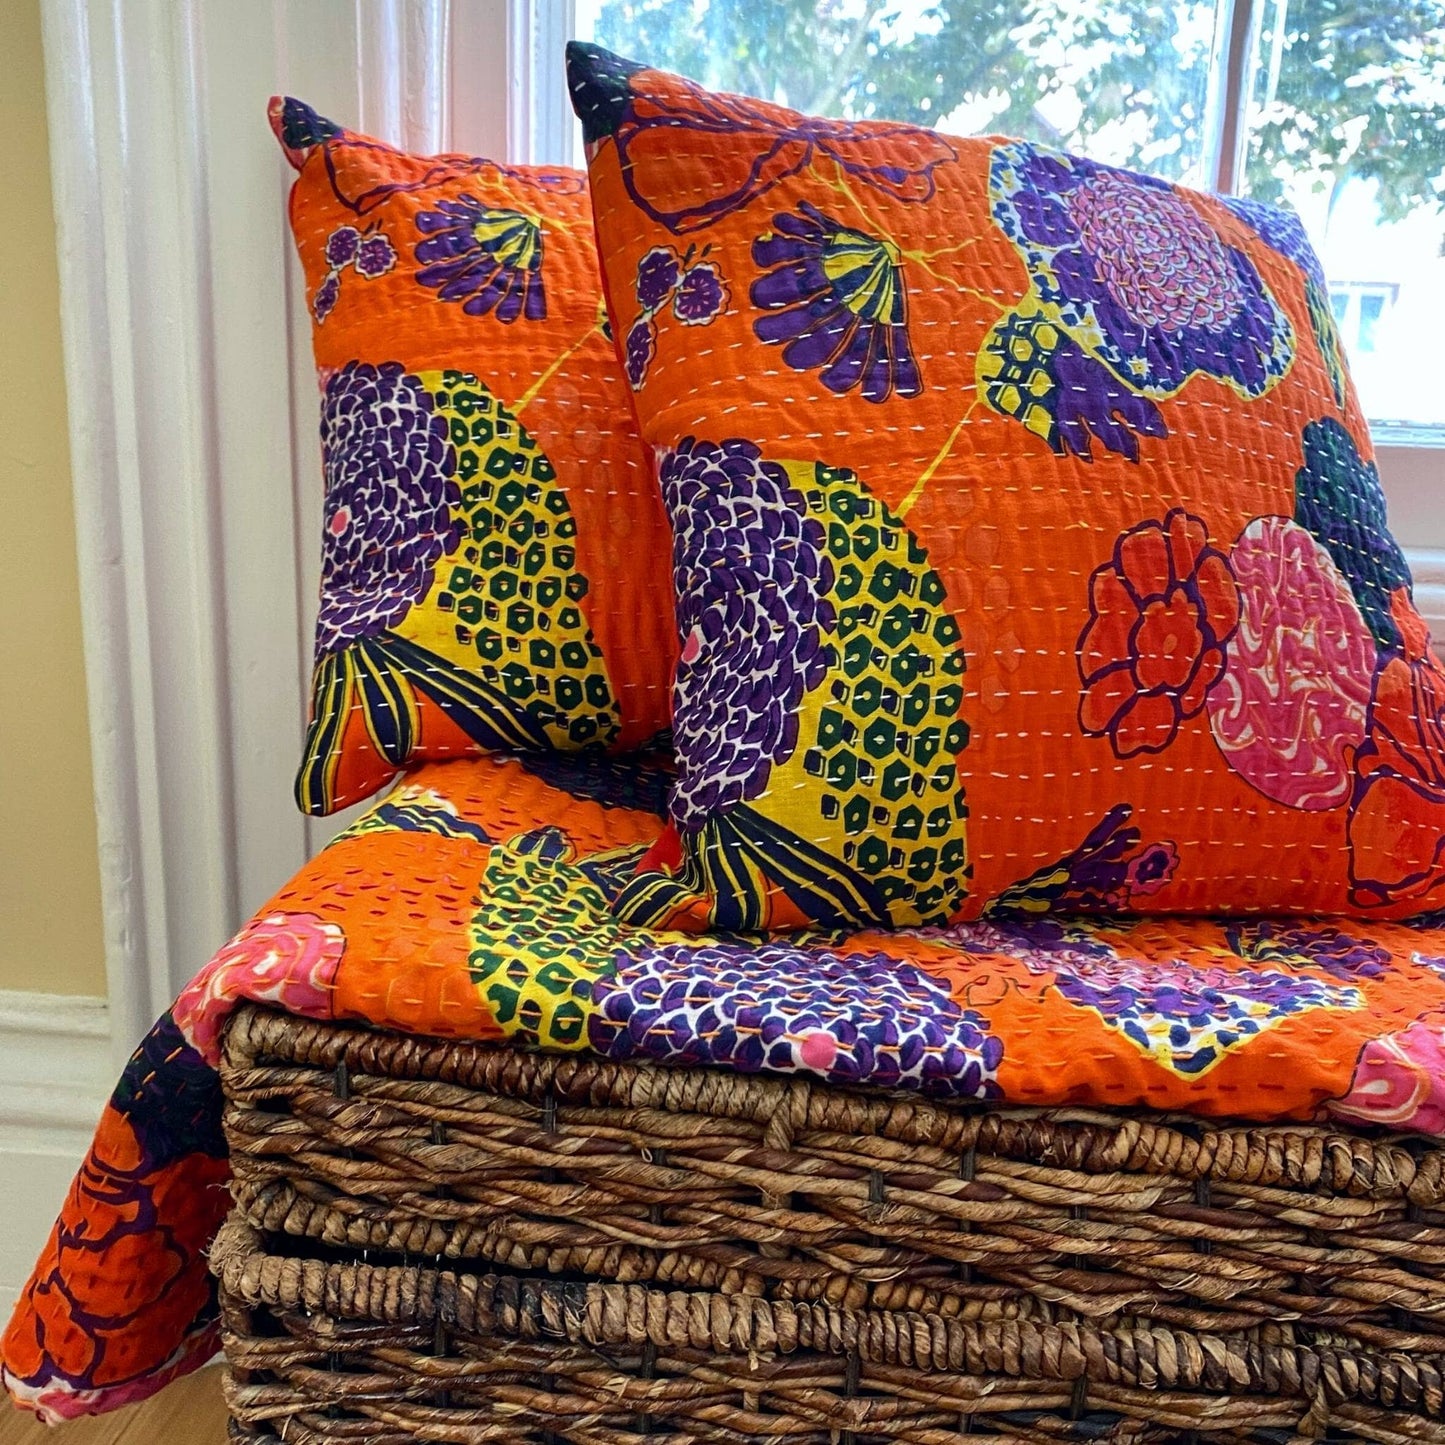 Two orange symphony kantha pillows laying a a matching quilt on top of a wooden basket in front of a window.